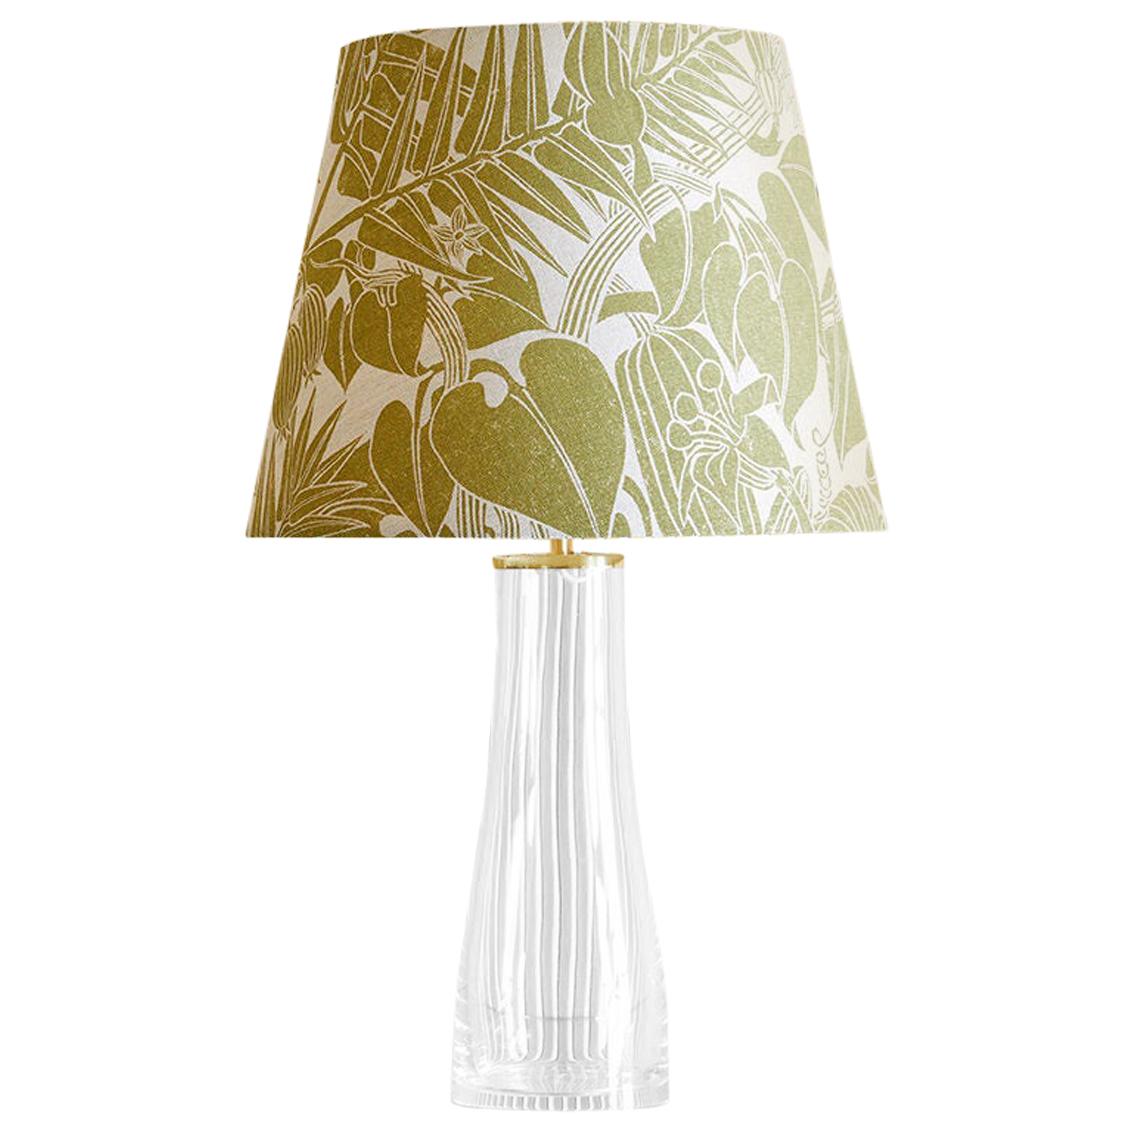 Contemporary Artek "M510" Table Lamp with Customized Lamp Shade, Finland